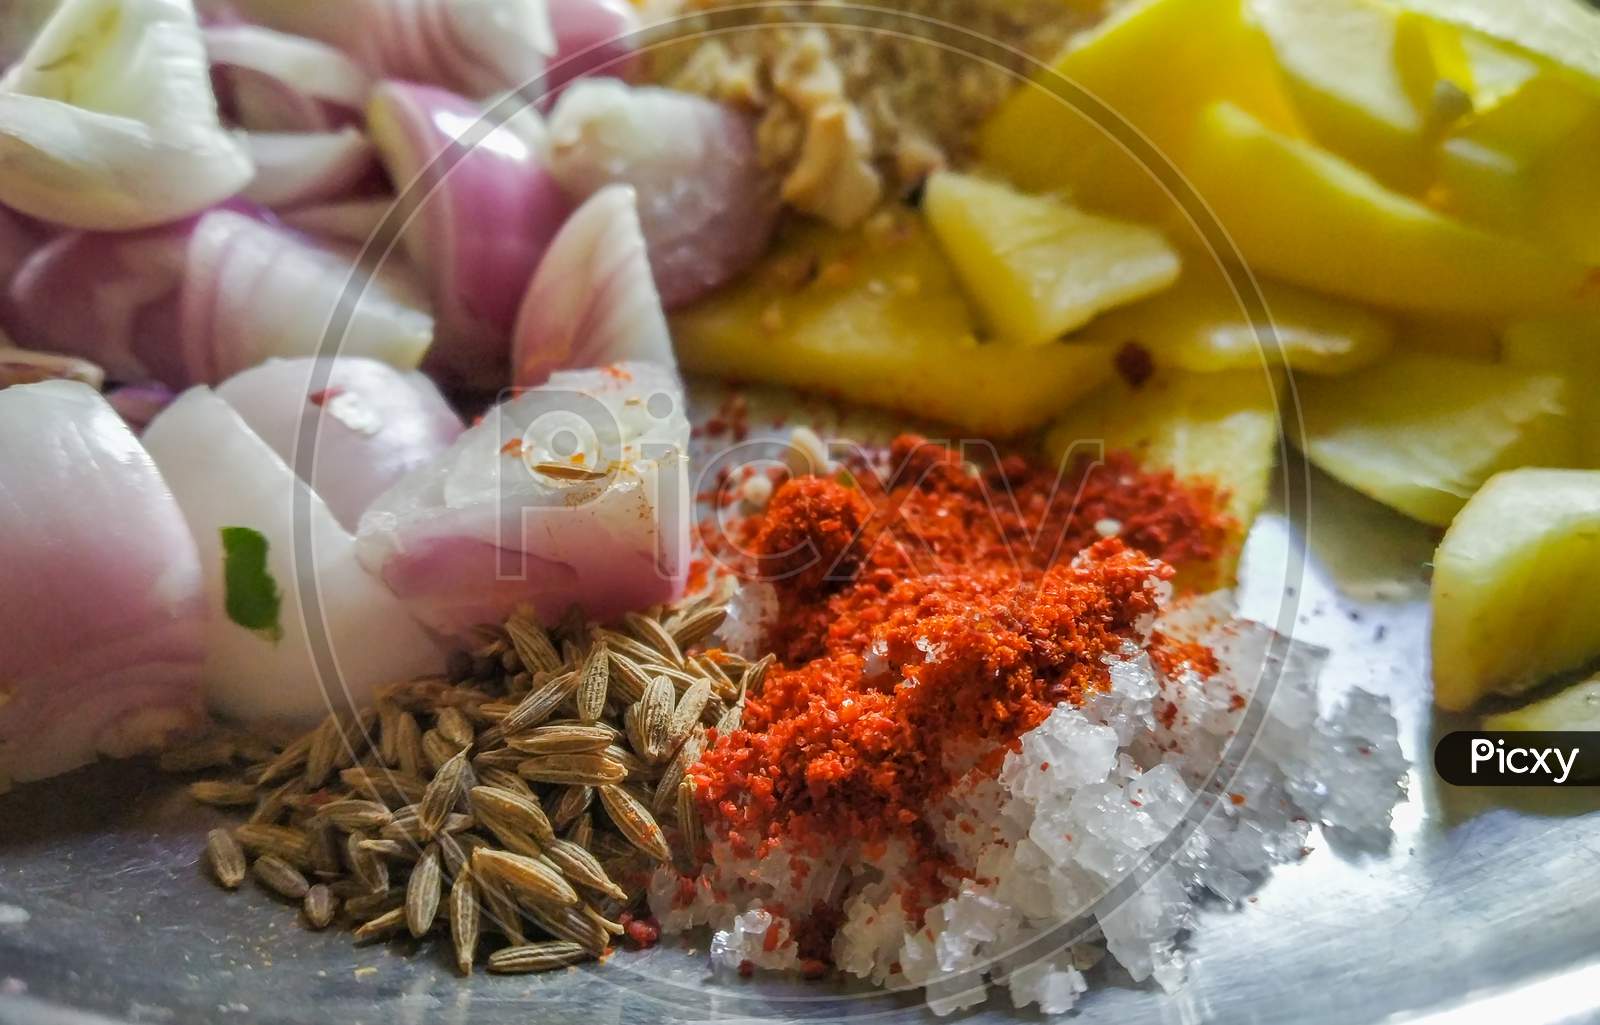 Combined Indian Spices And Ingredients For Making Curry In A Steel Plate With Wooden Background.